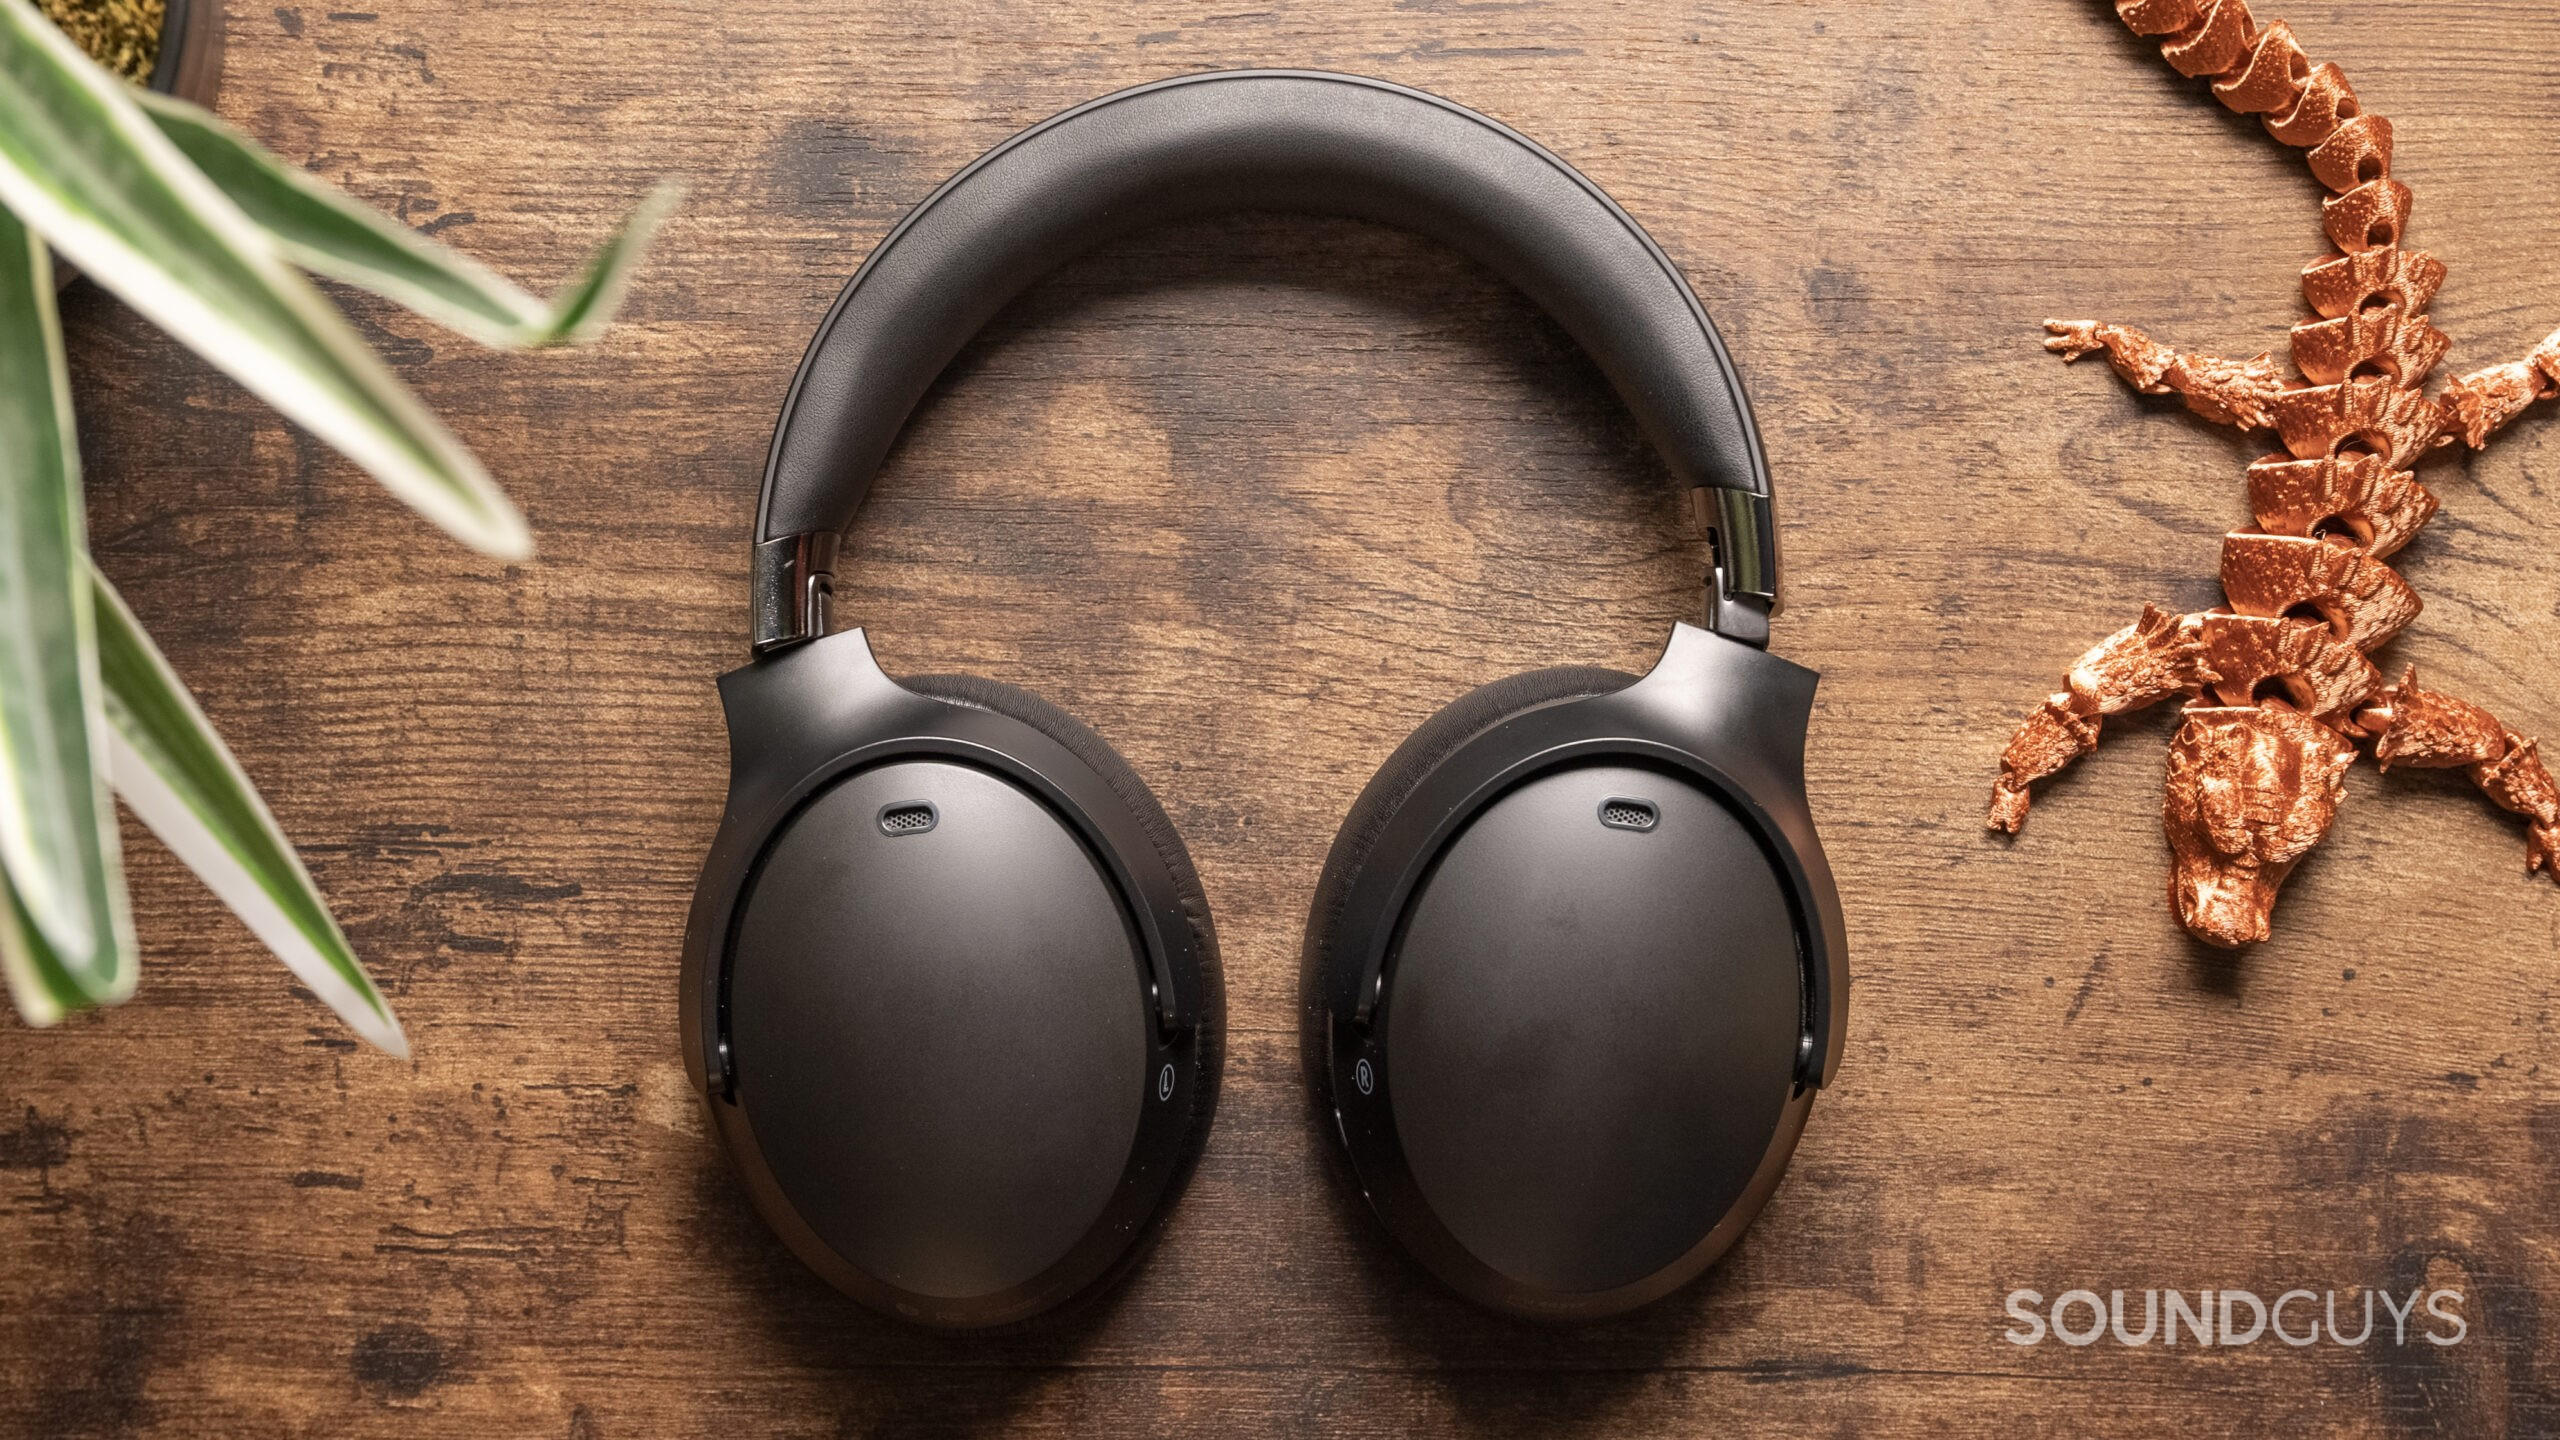 The Monoprice Dual Driver Bluetooth Headphones on table flat